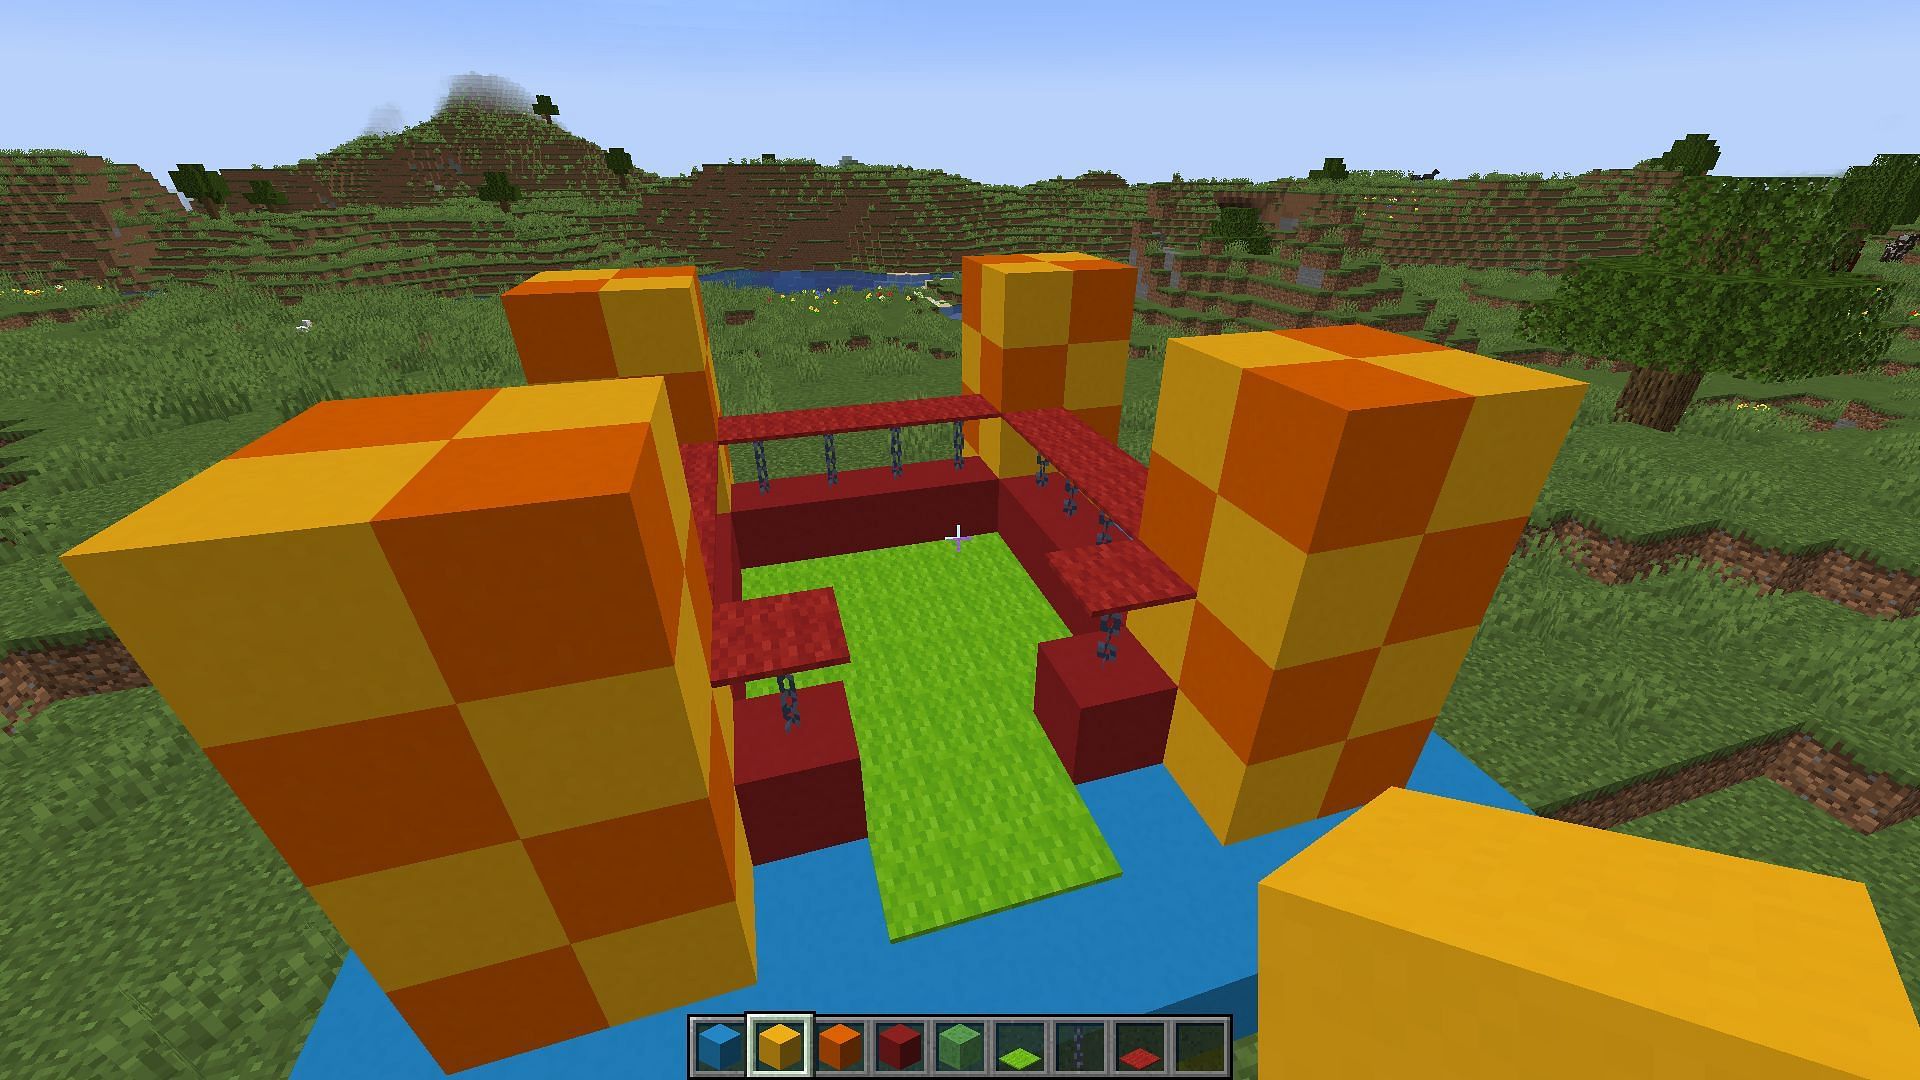 Chains, rugs, and checkerboard pillars were added to the bouncy house (Image via Minecraft)